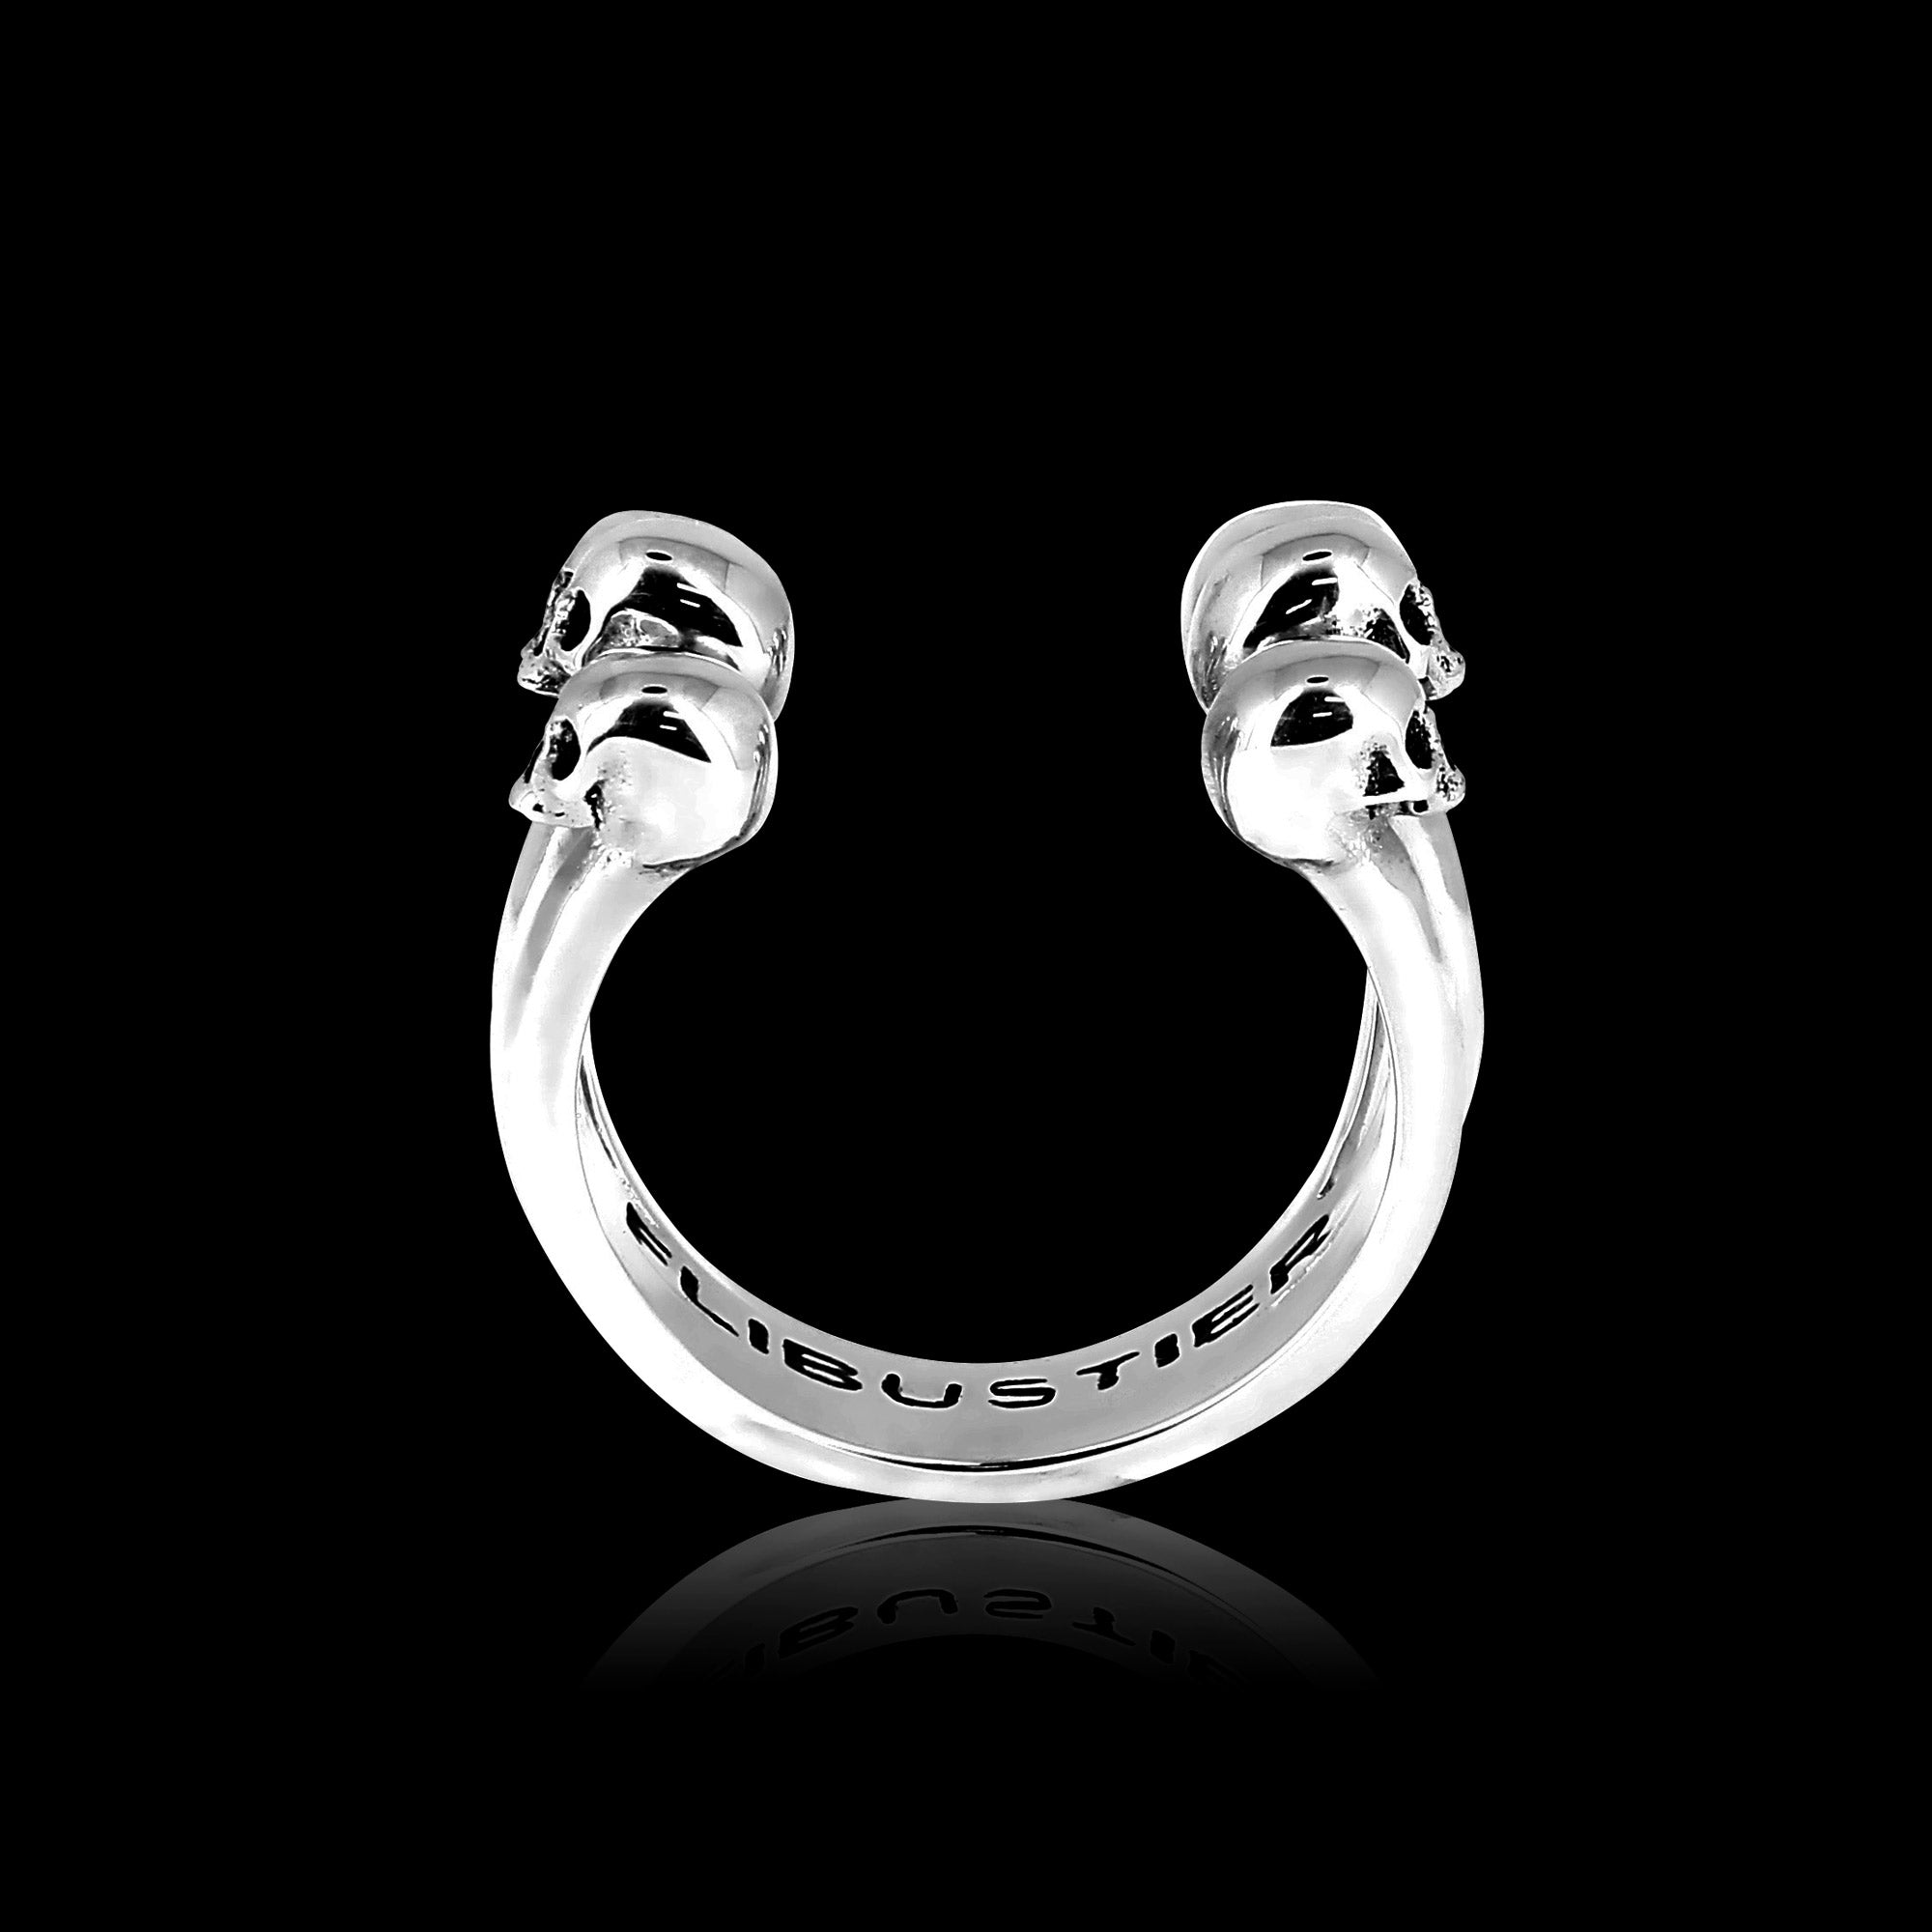 Mr Ribs - Sterling Silver Ring